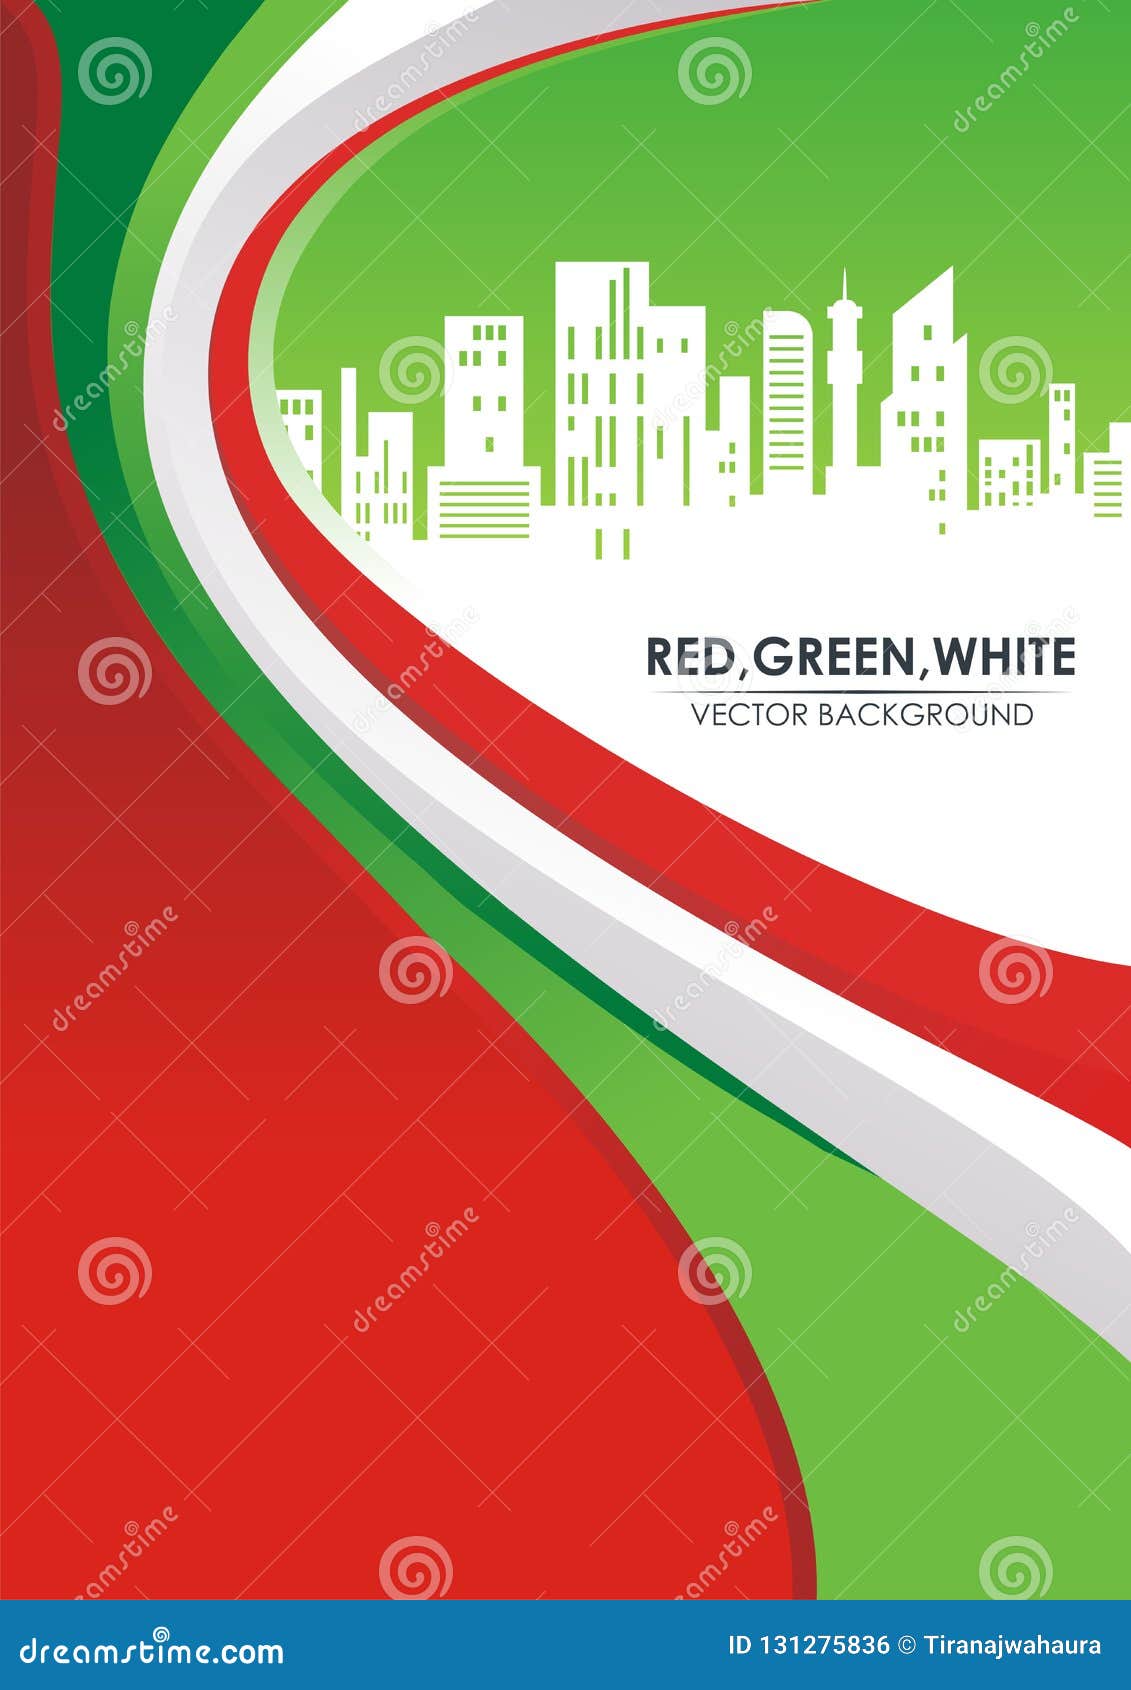 red, green, and white stylish abstract background